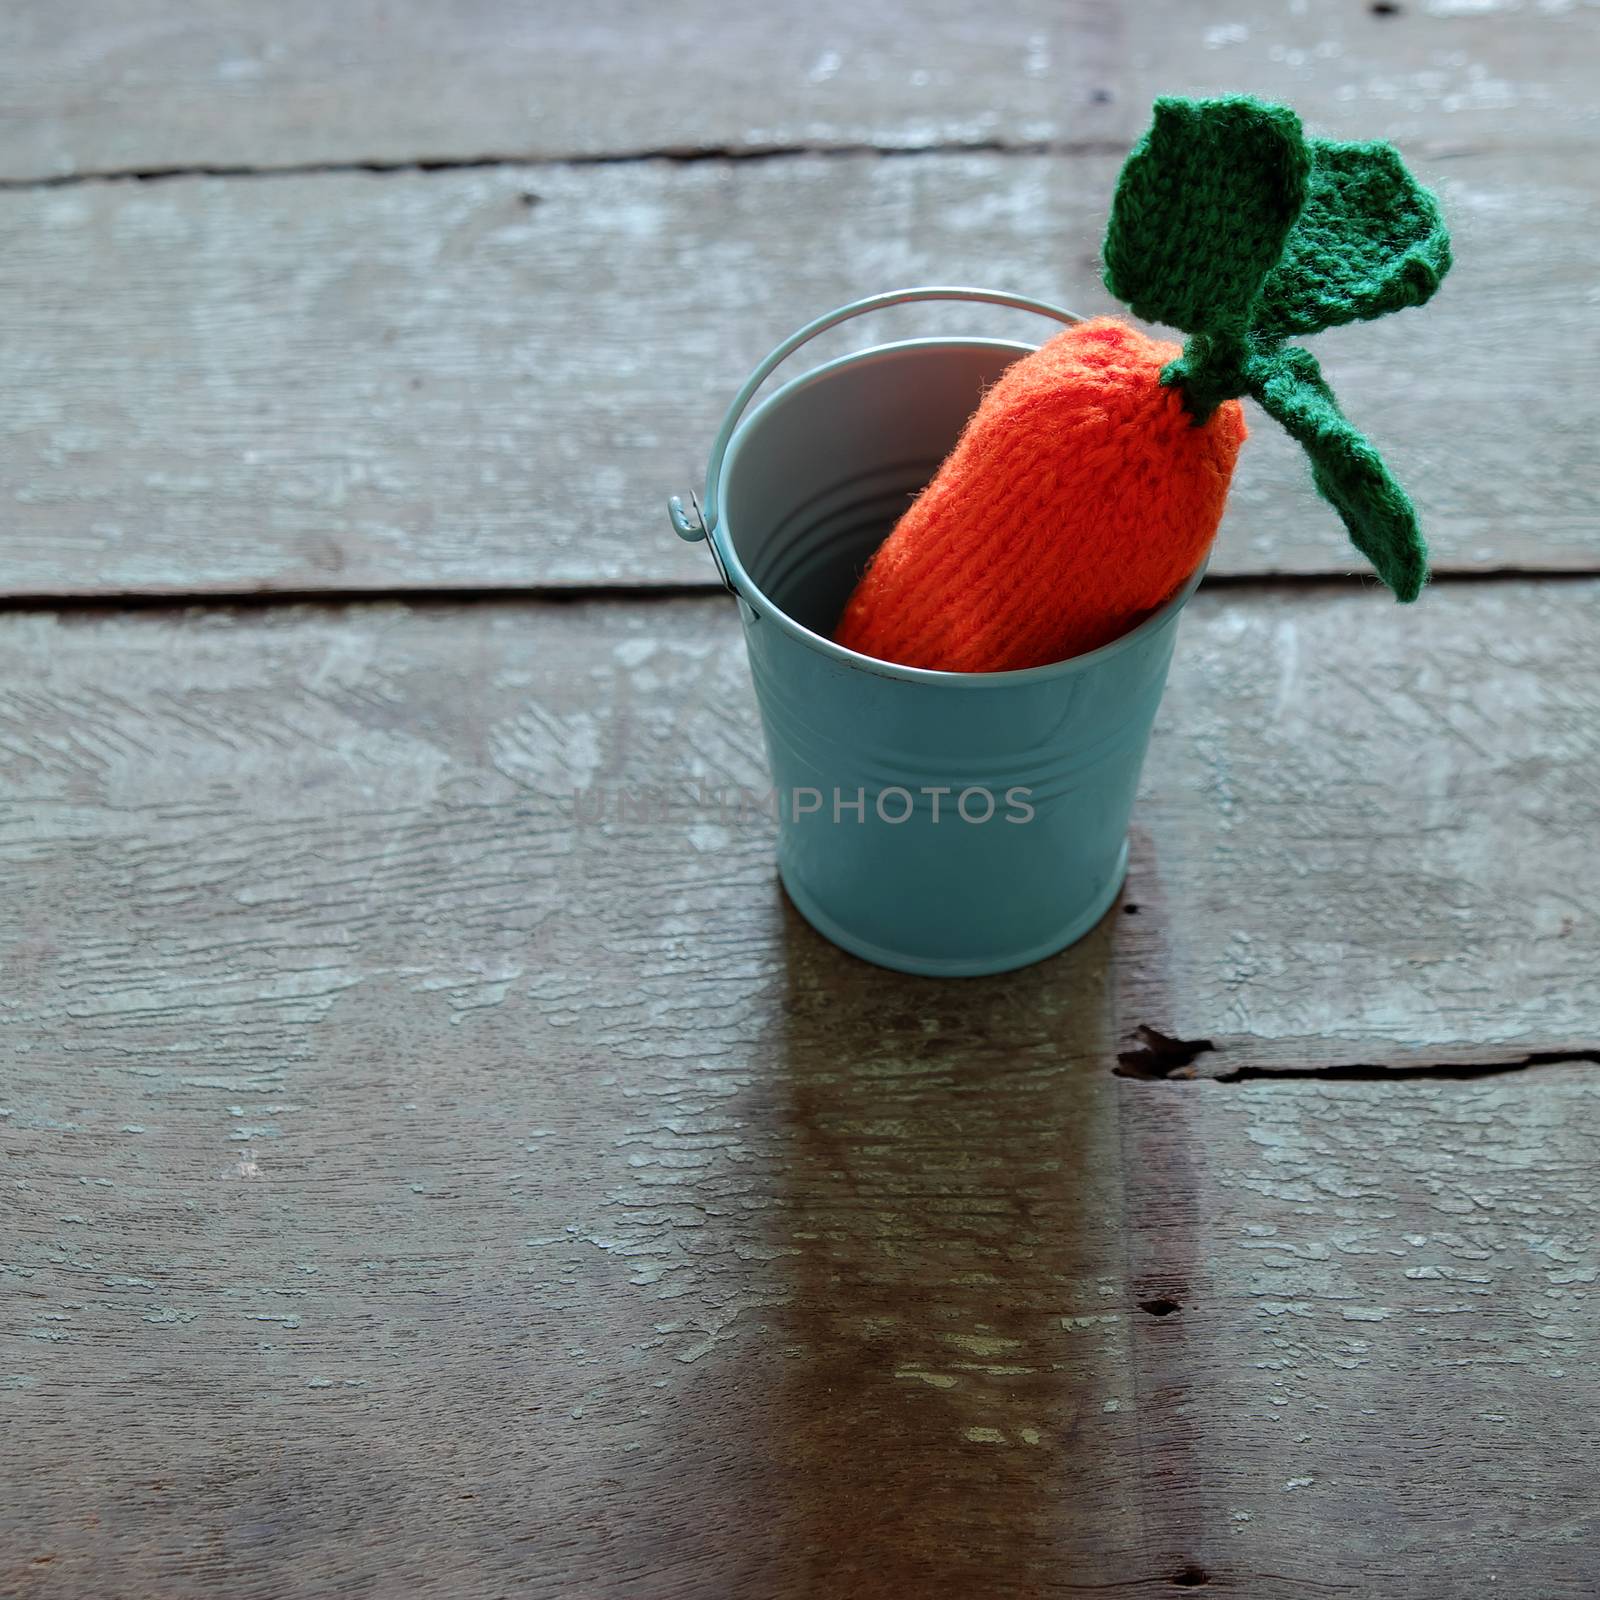 Knitted carrot, funny diy by xuanhuongho